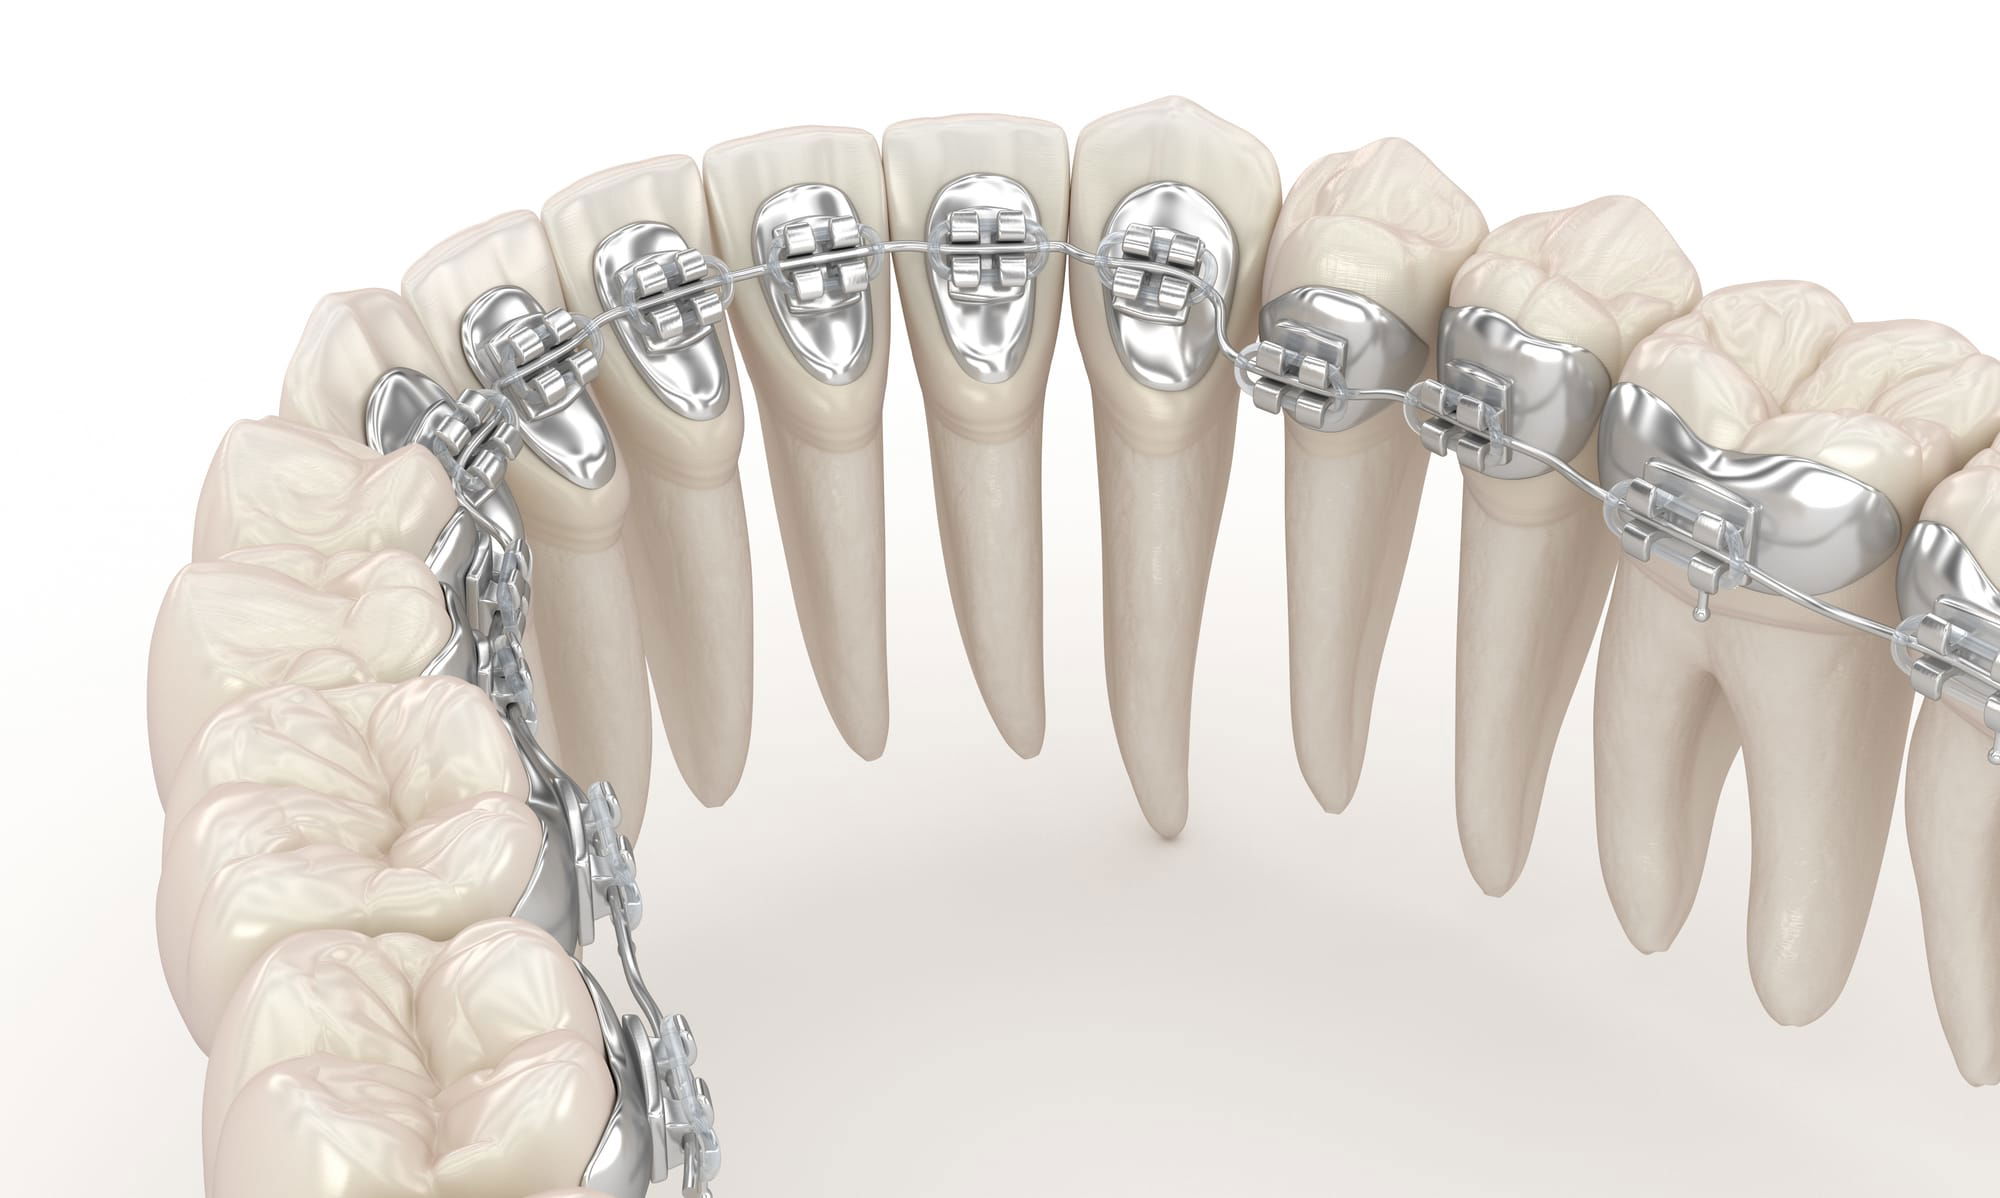 Braces placed behind the teeth, offering a concealed method for teeth straightening.